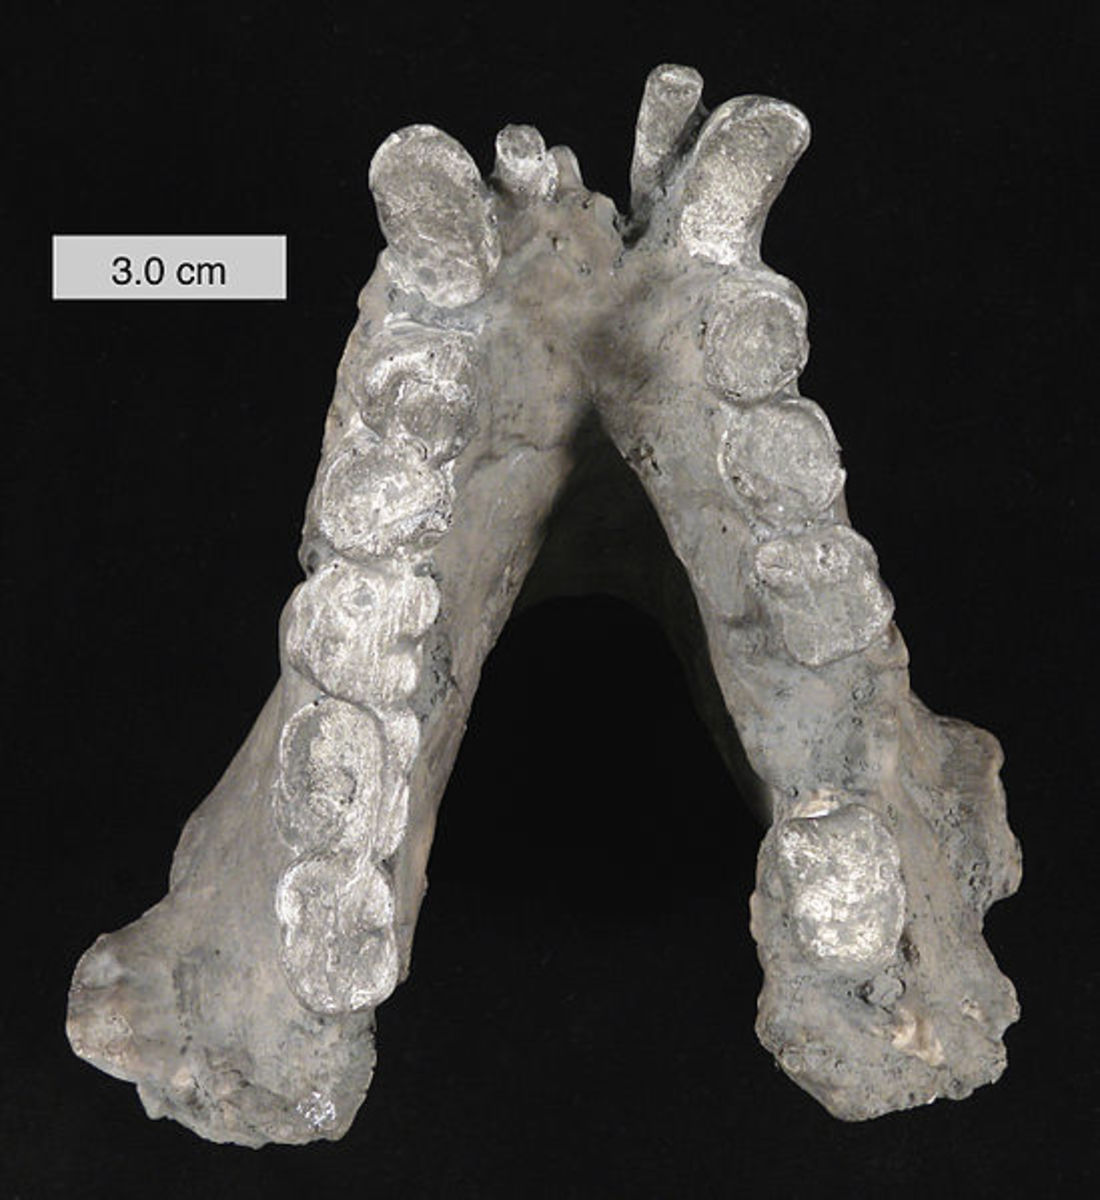 Even after millions of years, little fossil evidence exists for Gigantopithecus Blacki.